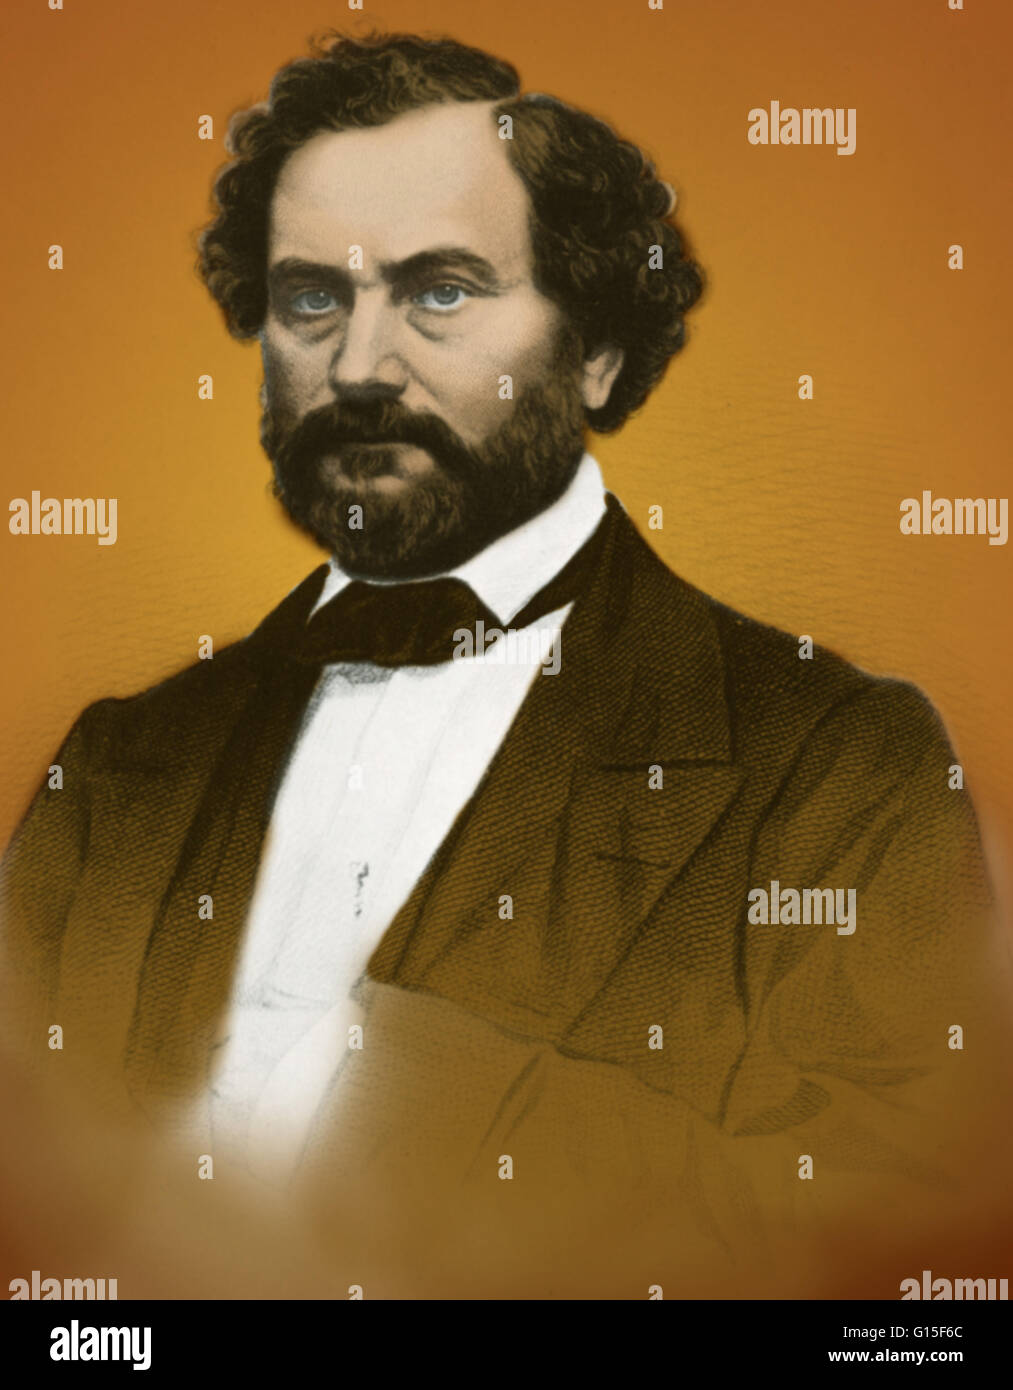 Samuel Colt (1814 -1862) was an American inventor and industrialist. He was the founder of Colt's Patent Fire-Arms Manufacturing Company (Colt's Manufacturing Company), and is widely credited with popularizing the revolver. In 2006, he was inducted into t Stock Photo